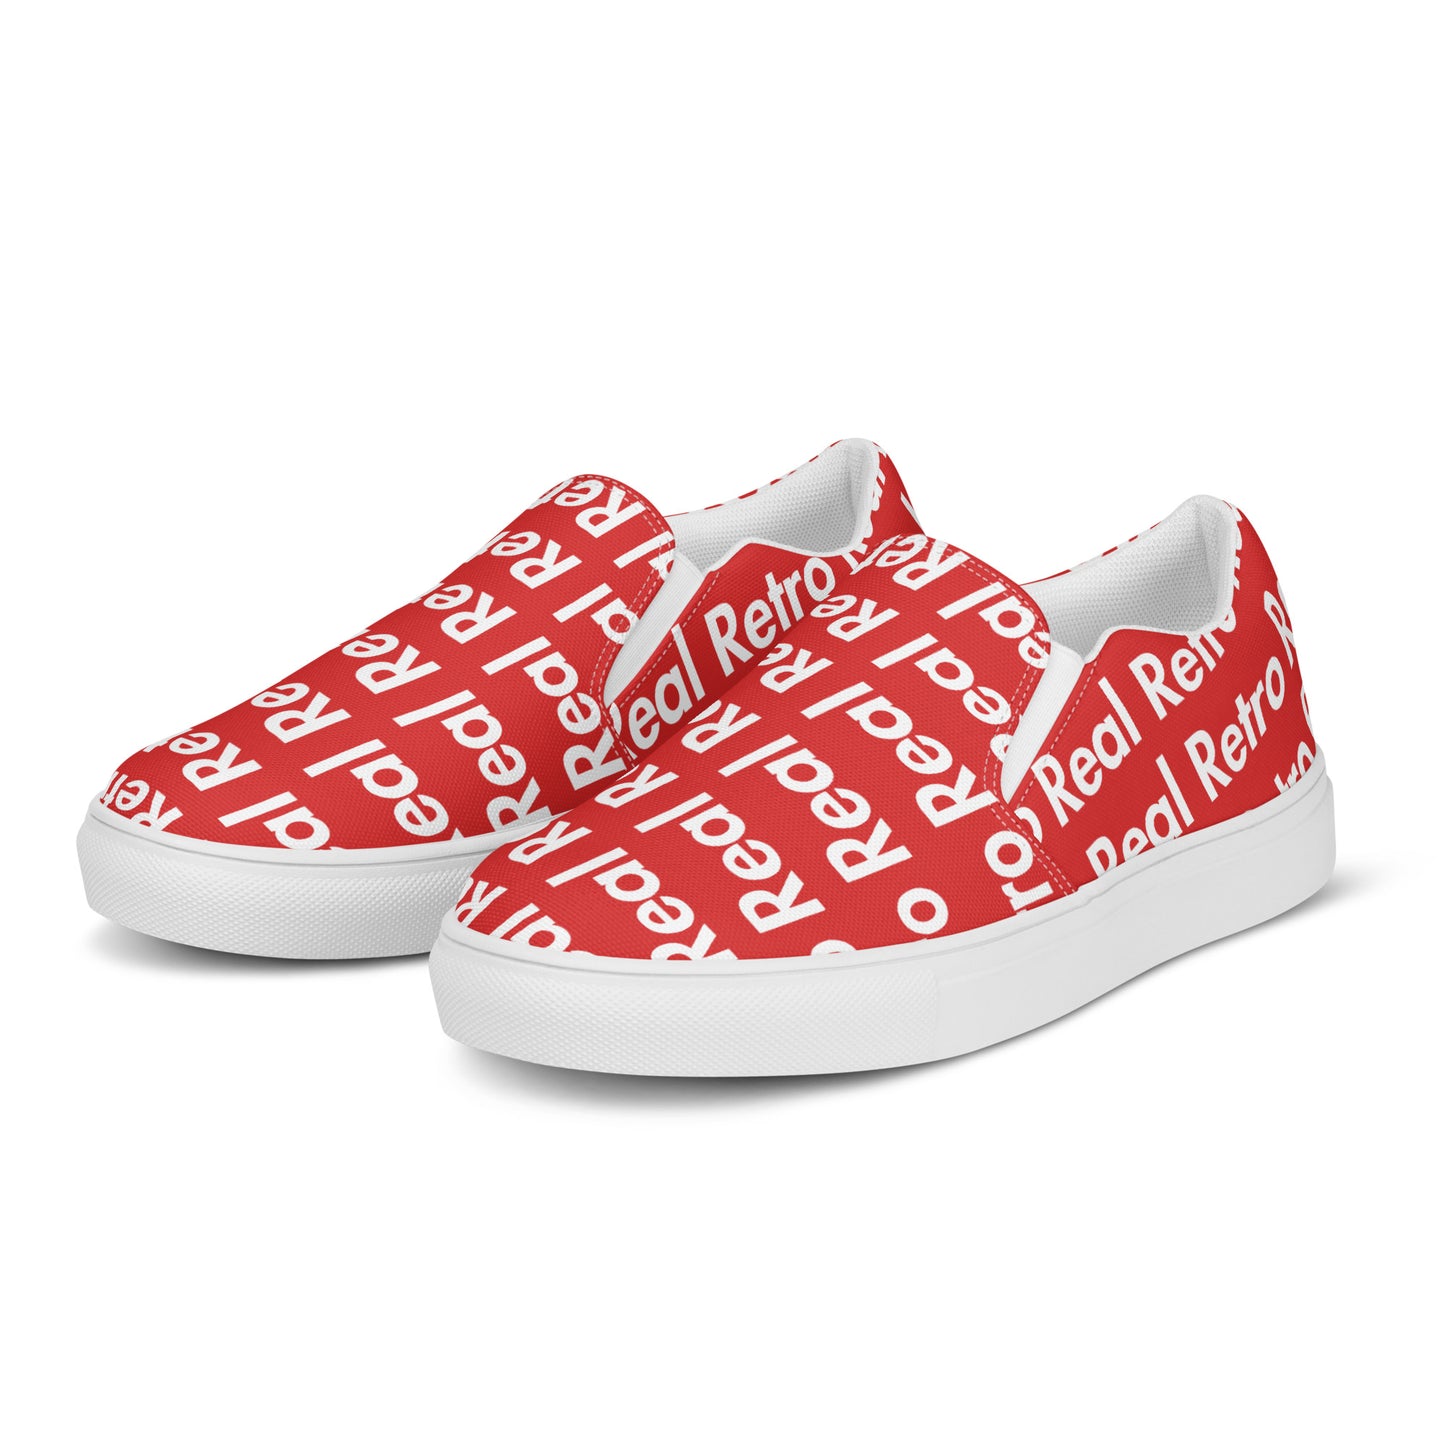 Real Retro Red Men’s slip-on canvas shoes